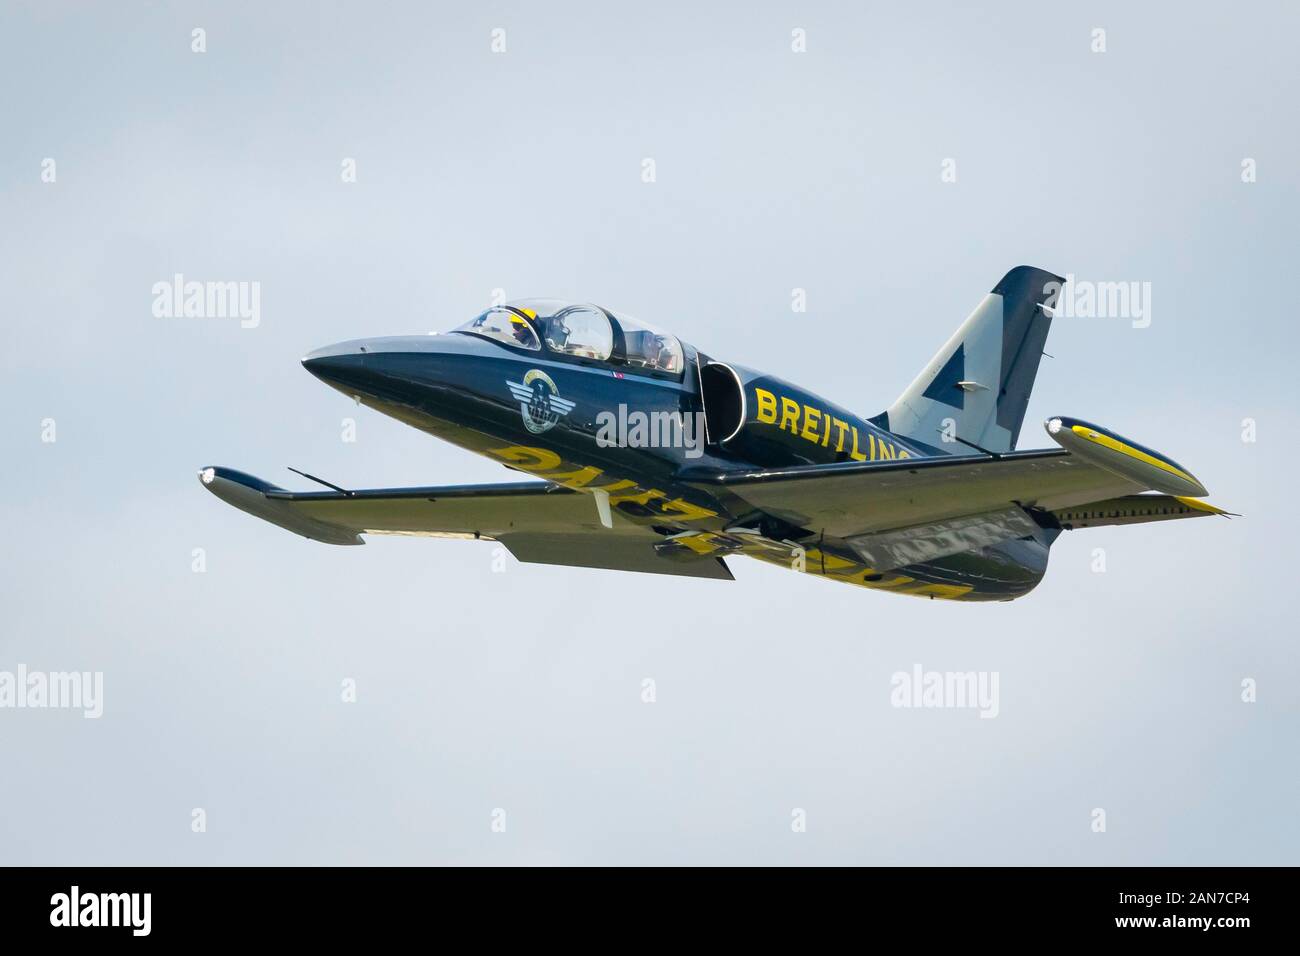 Fairford, Gloucestershire, UK - July 20th, 2019: The Breitling Display Team L-39 Albatros perform at Fairford International Air Tattoo 2019 Stock Photo